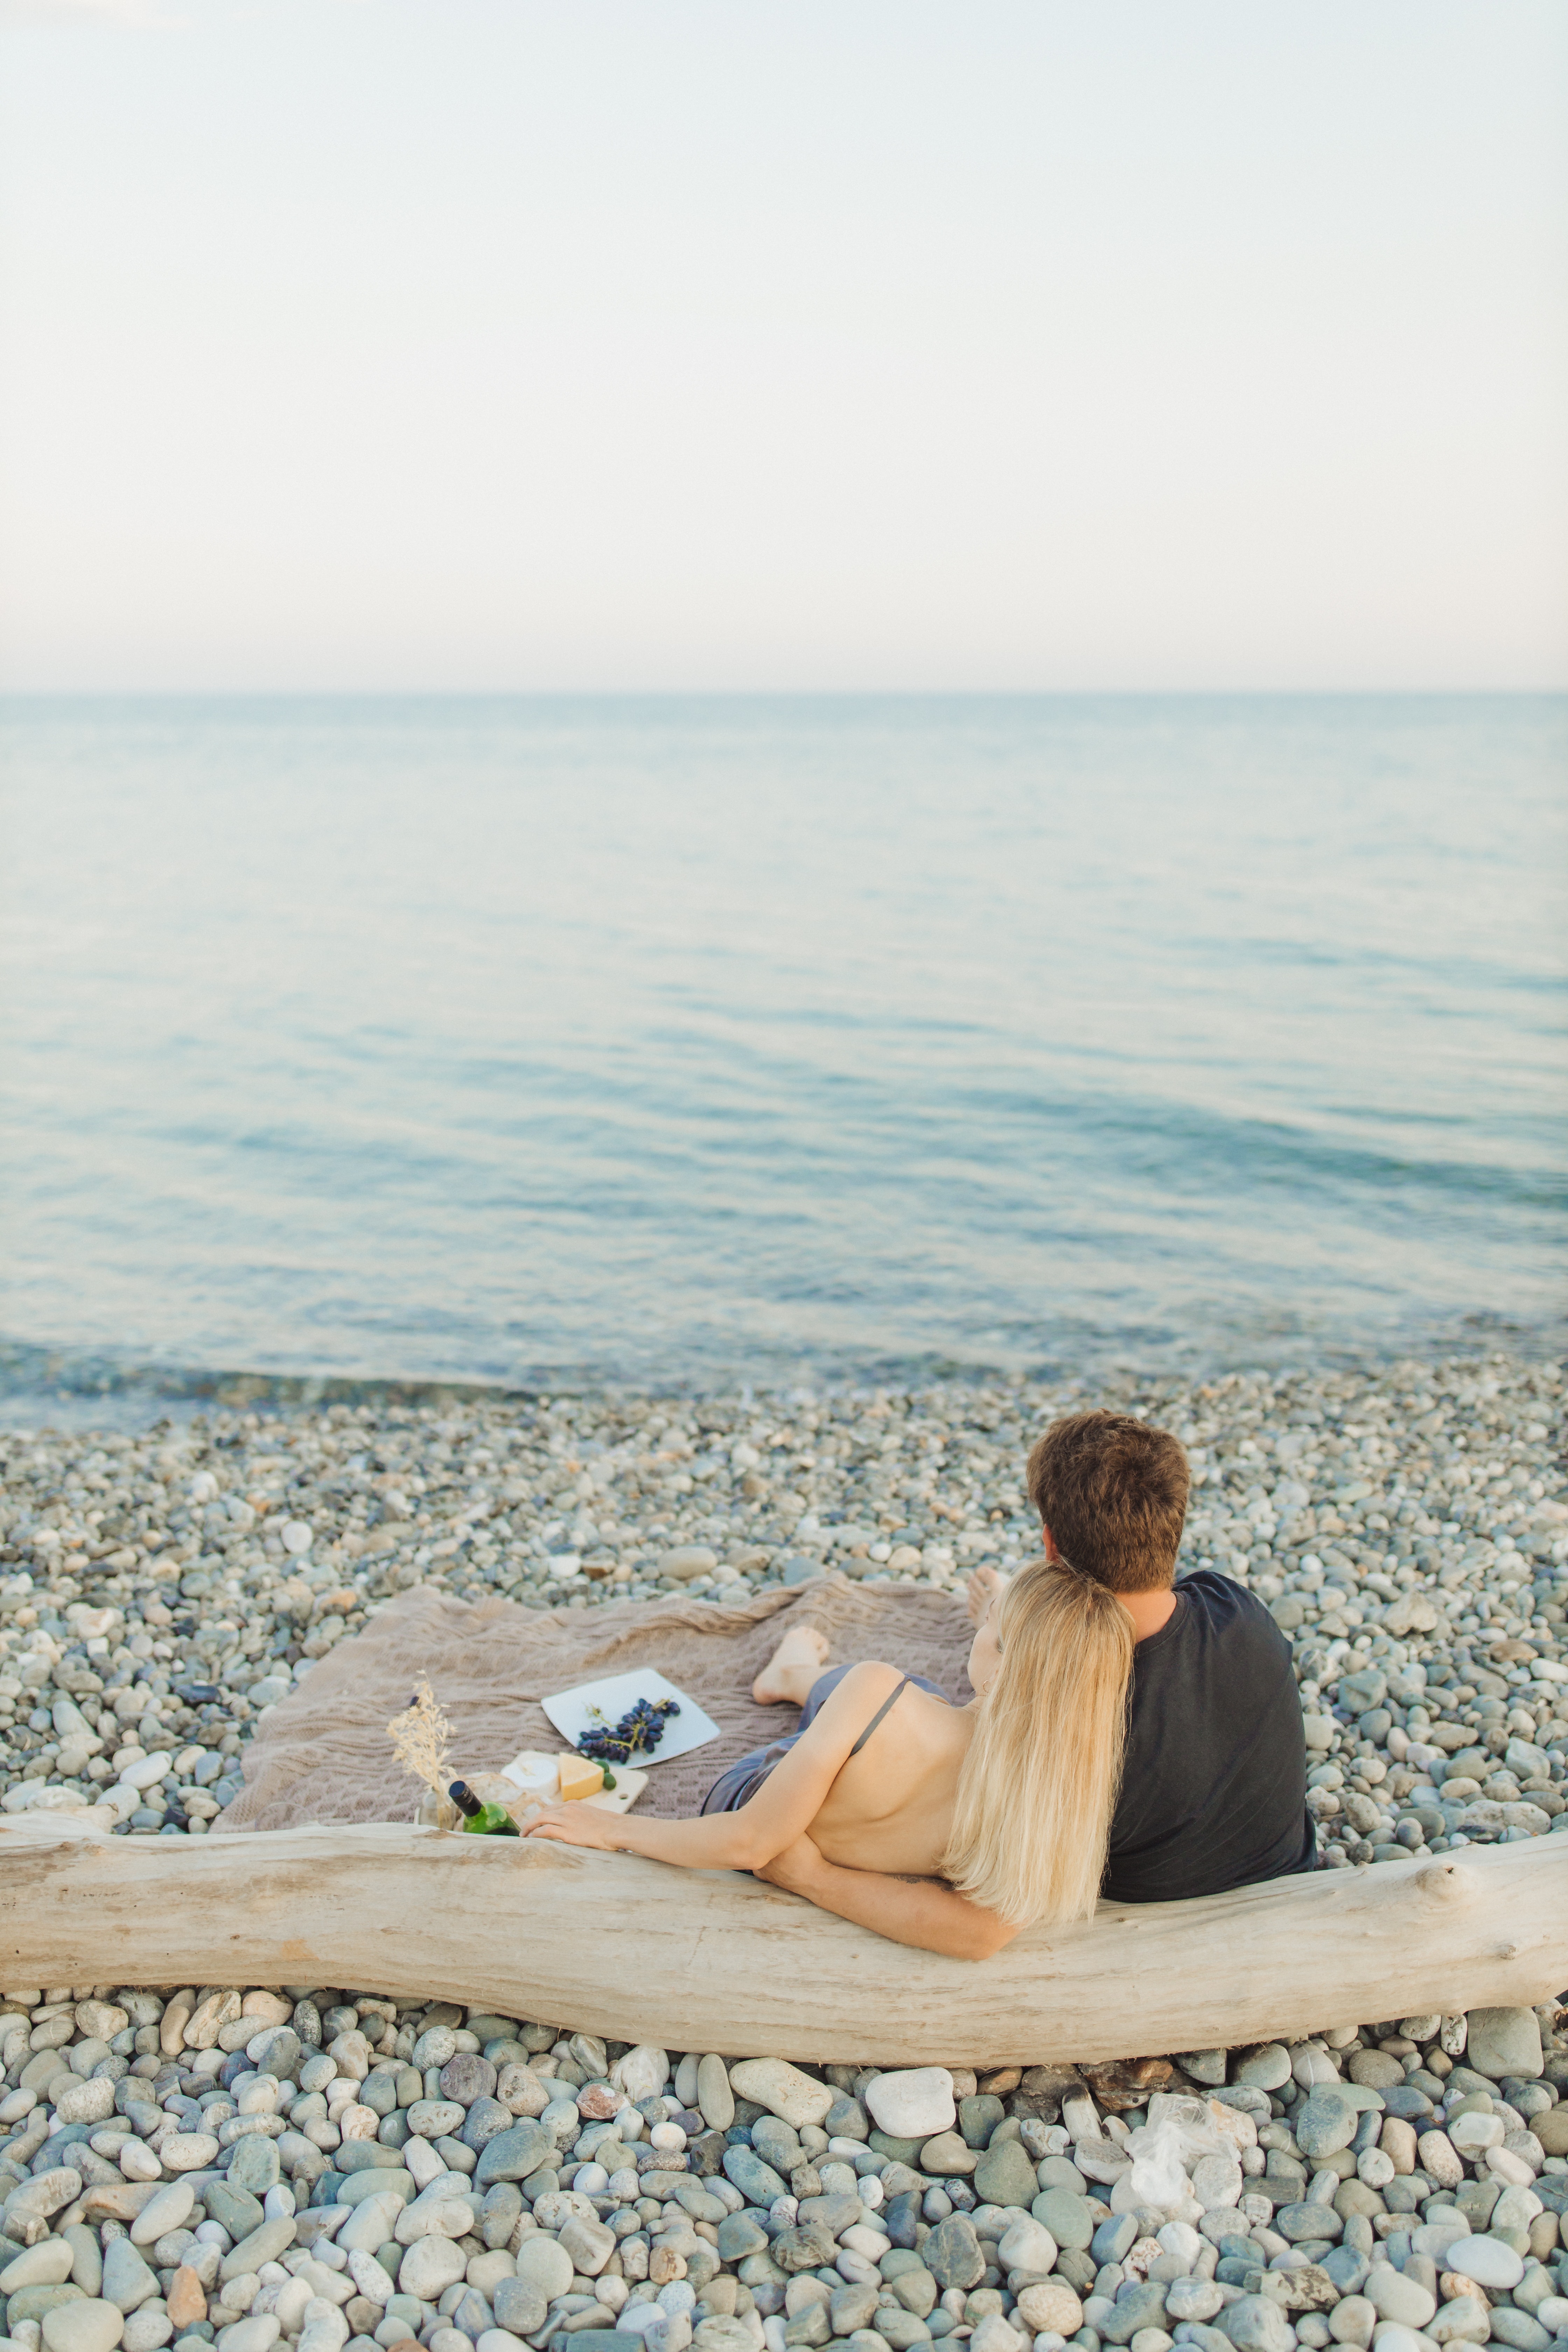 A man and a woman enjoying a peaceful date by the shoreline. | Source: Pexels